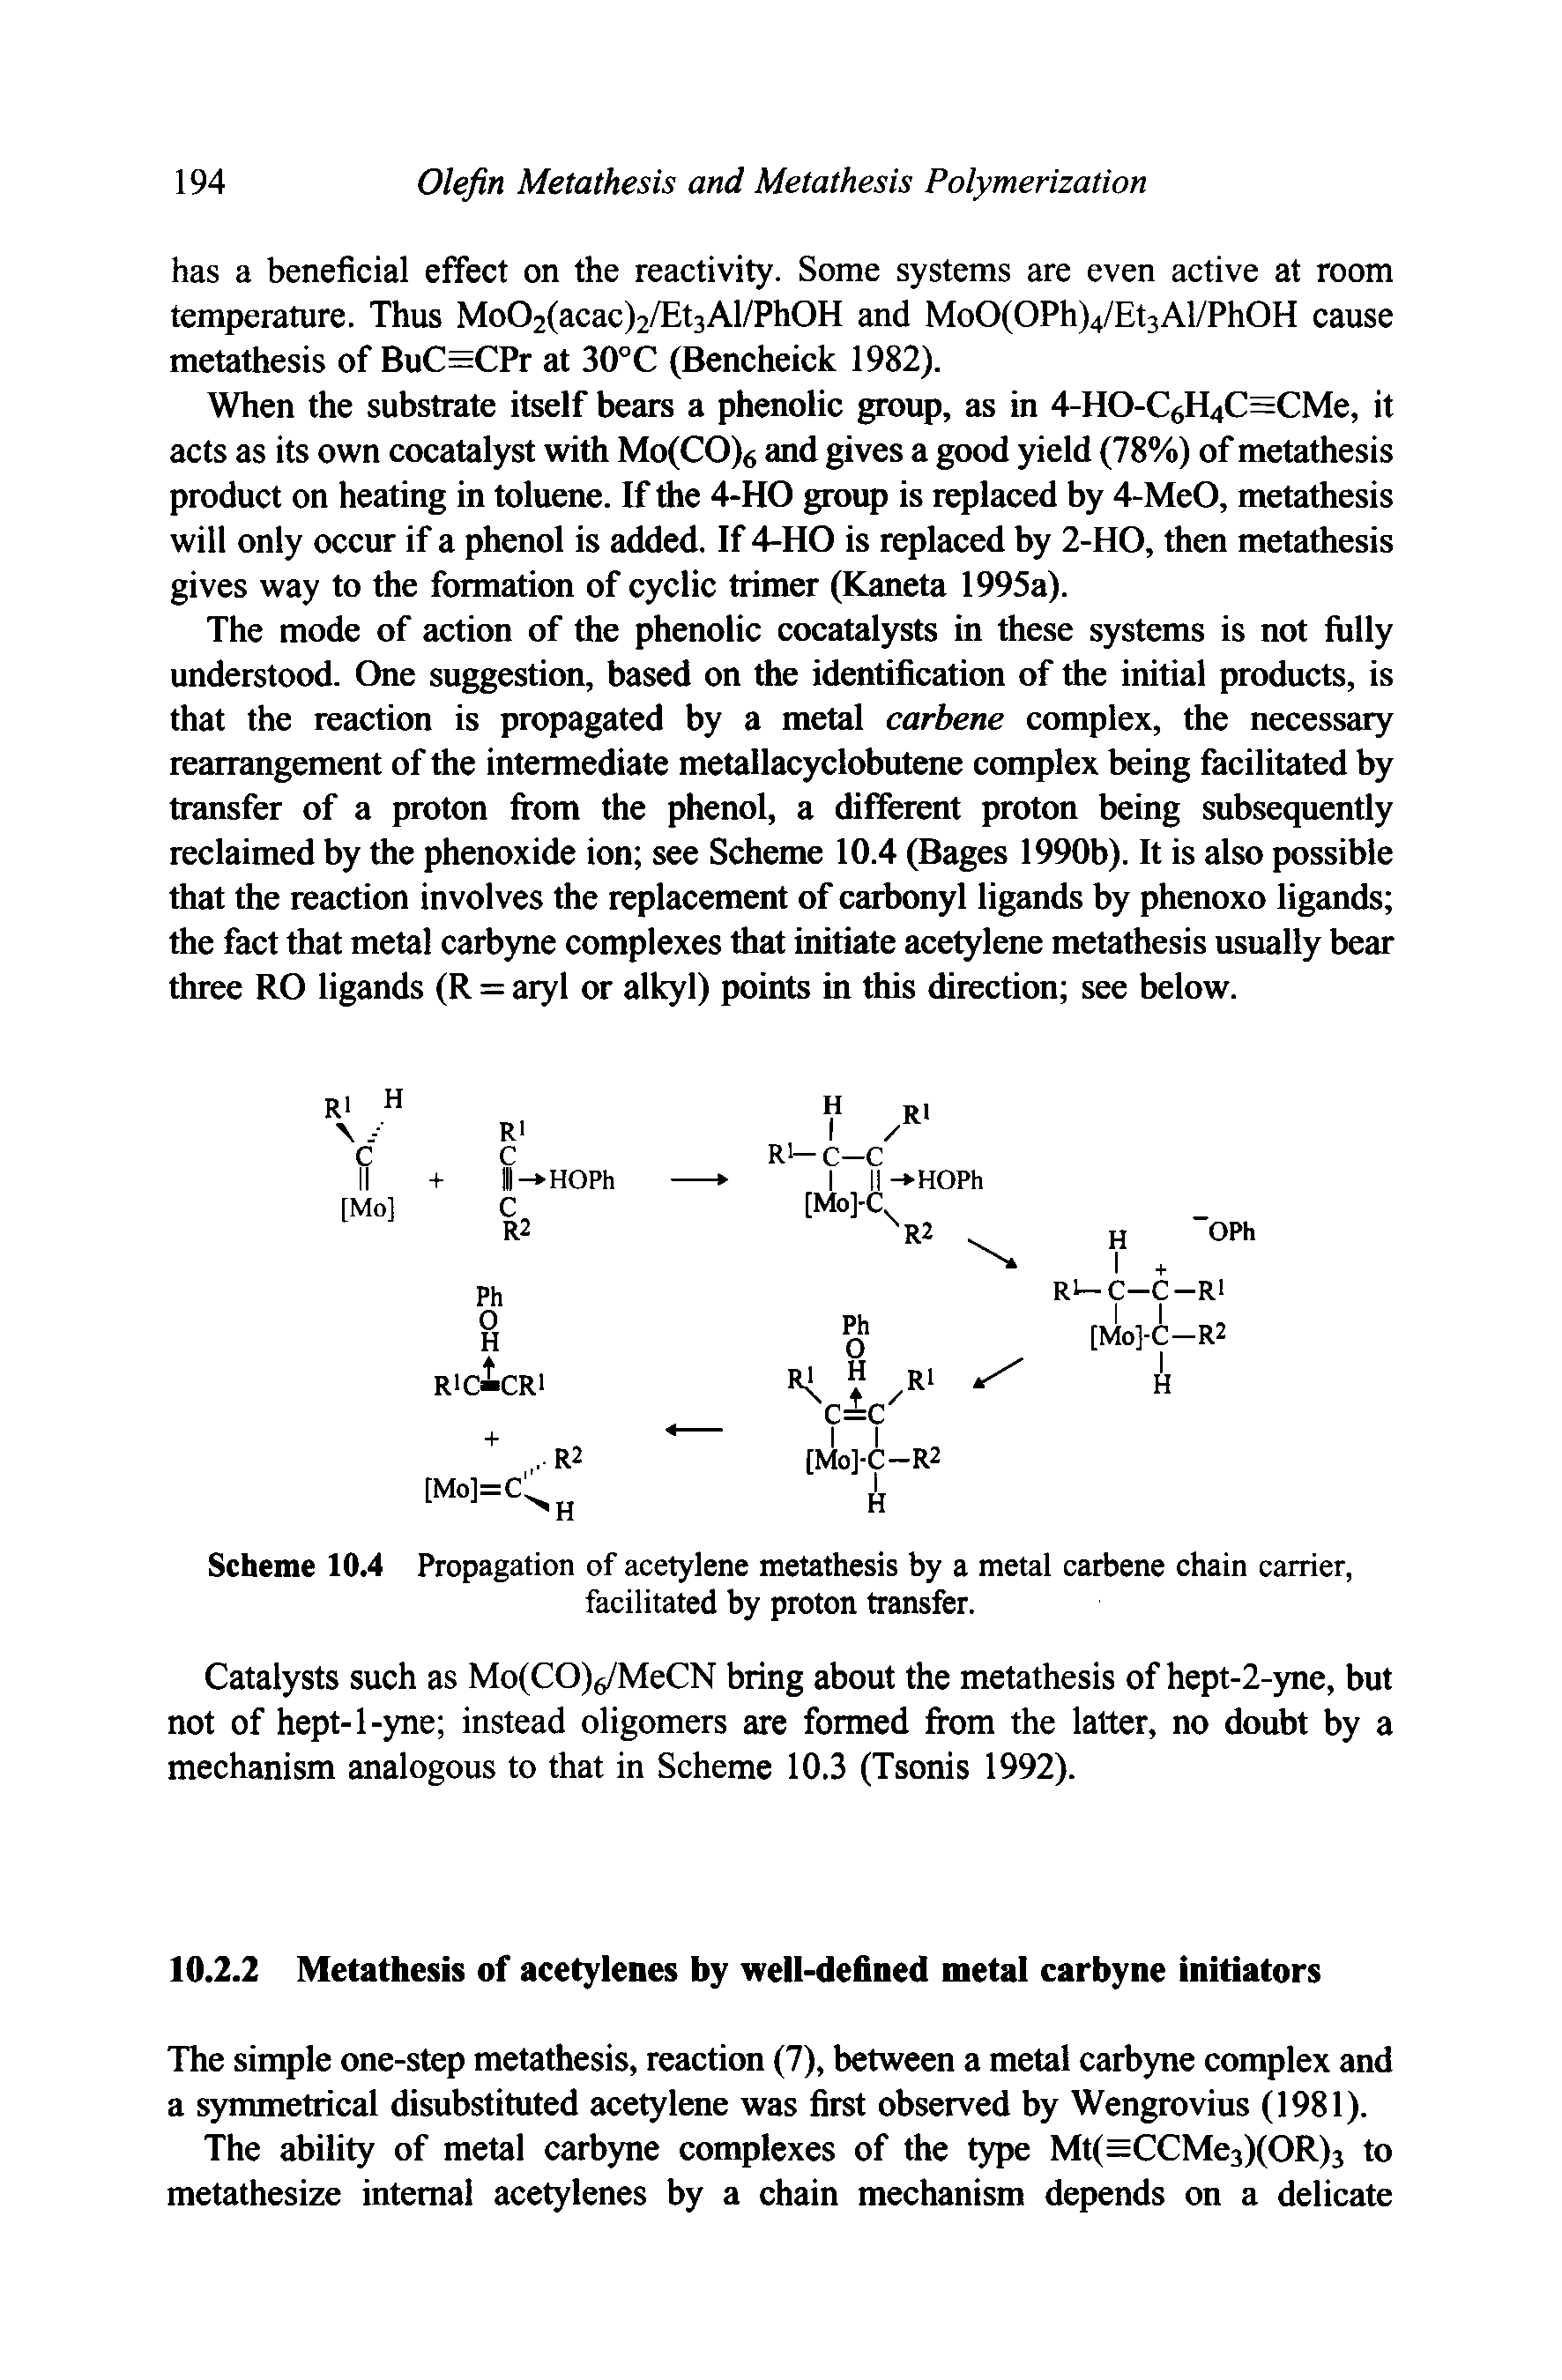 Scheme 10.4 Propagation of acetylene metathesis by a metal carbene chain carrier, facilitated by proton transfer.